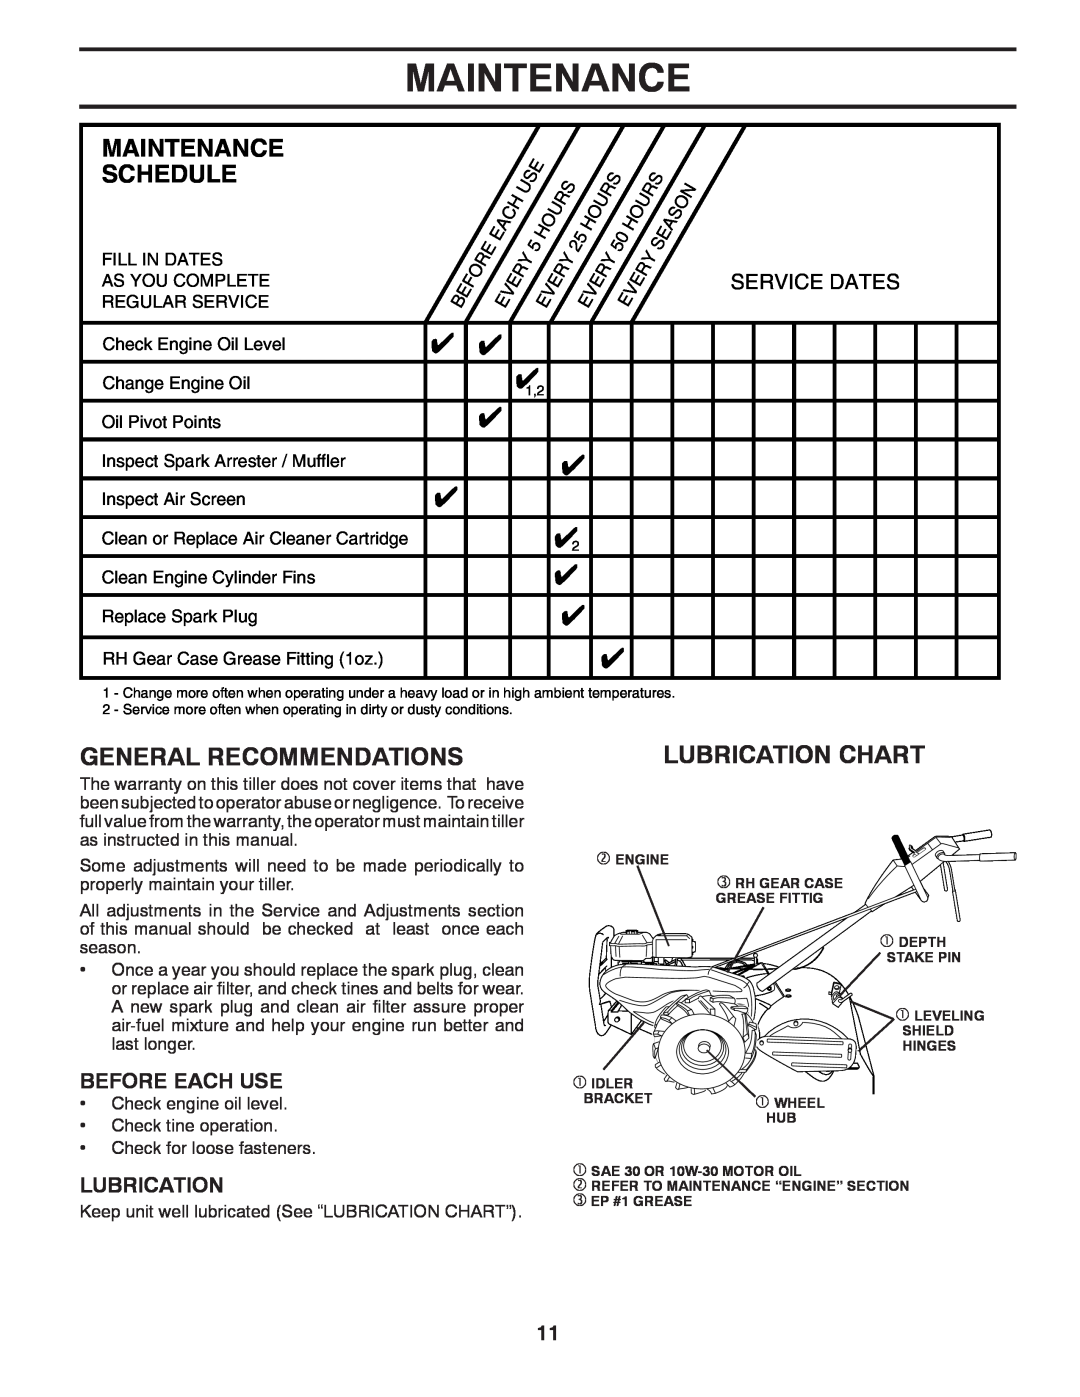 Poulan 96092002200 Maintenance Schedule, General Recommendations, Lubrication Chart, Service Dates, Before Each Use 